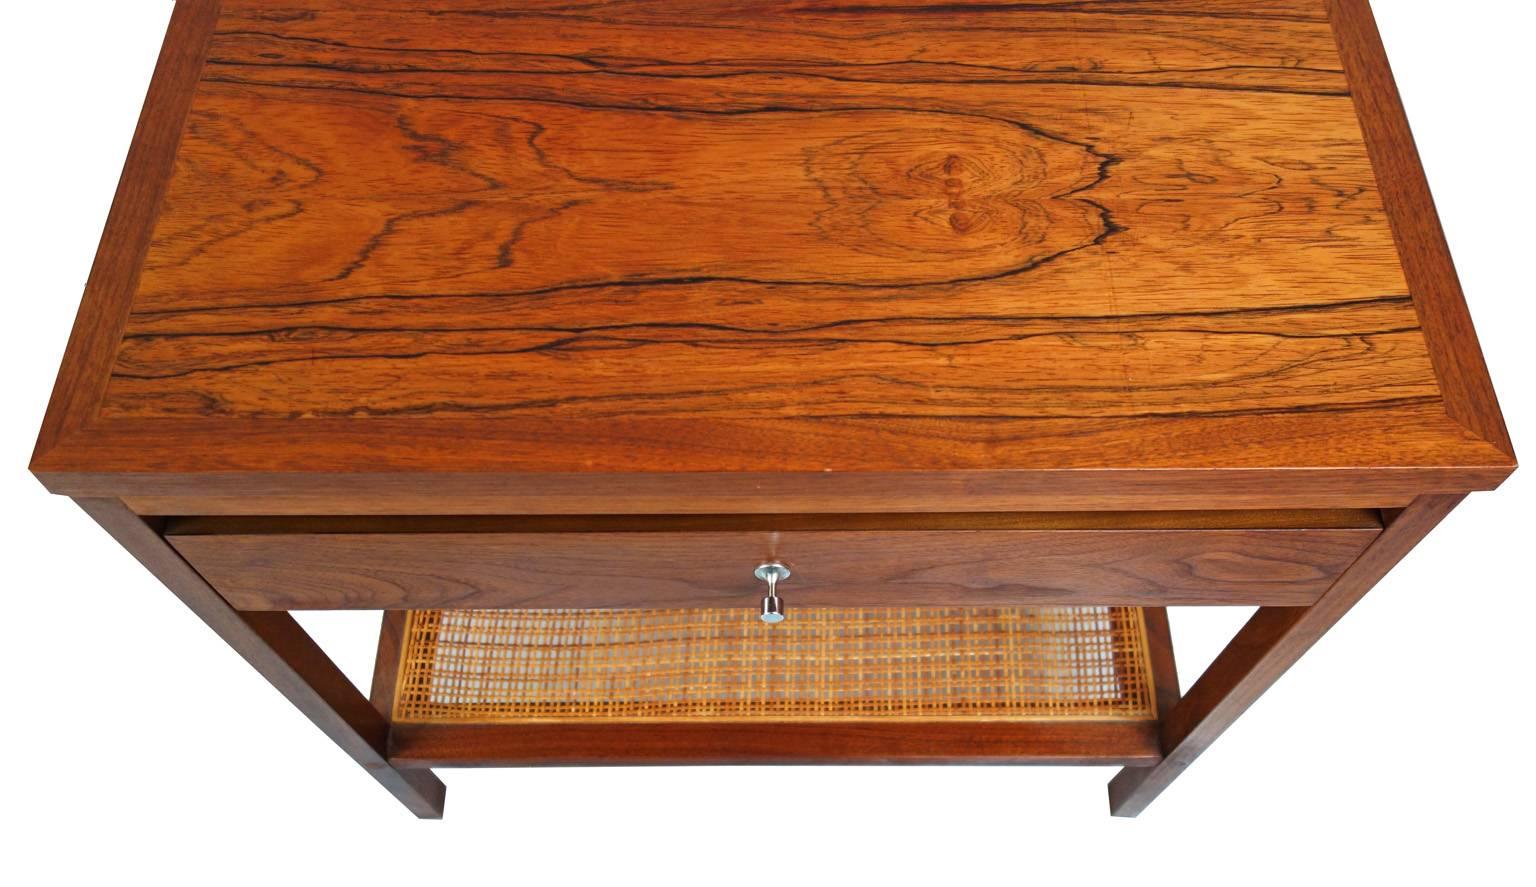 Beautiful pair of Mid-Century end tables comprised of a walnut and rosewood with a caned lower shelf. Designed by Paul McCobb 